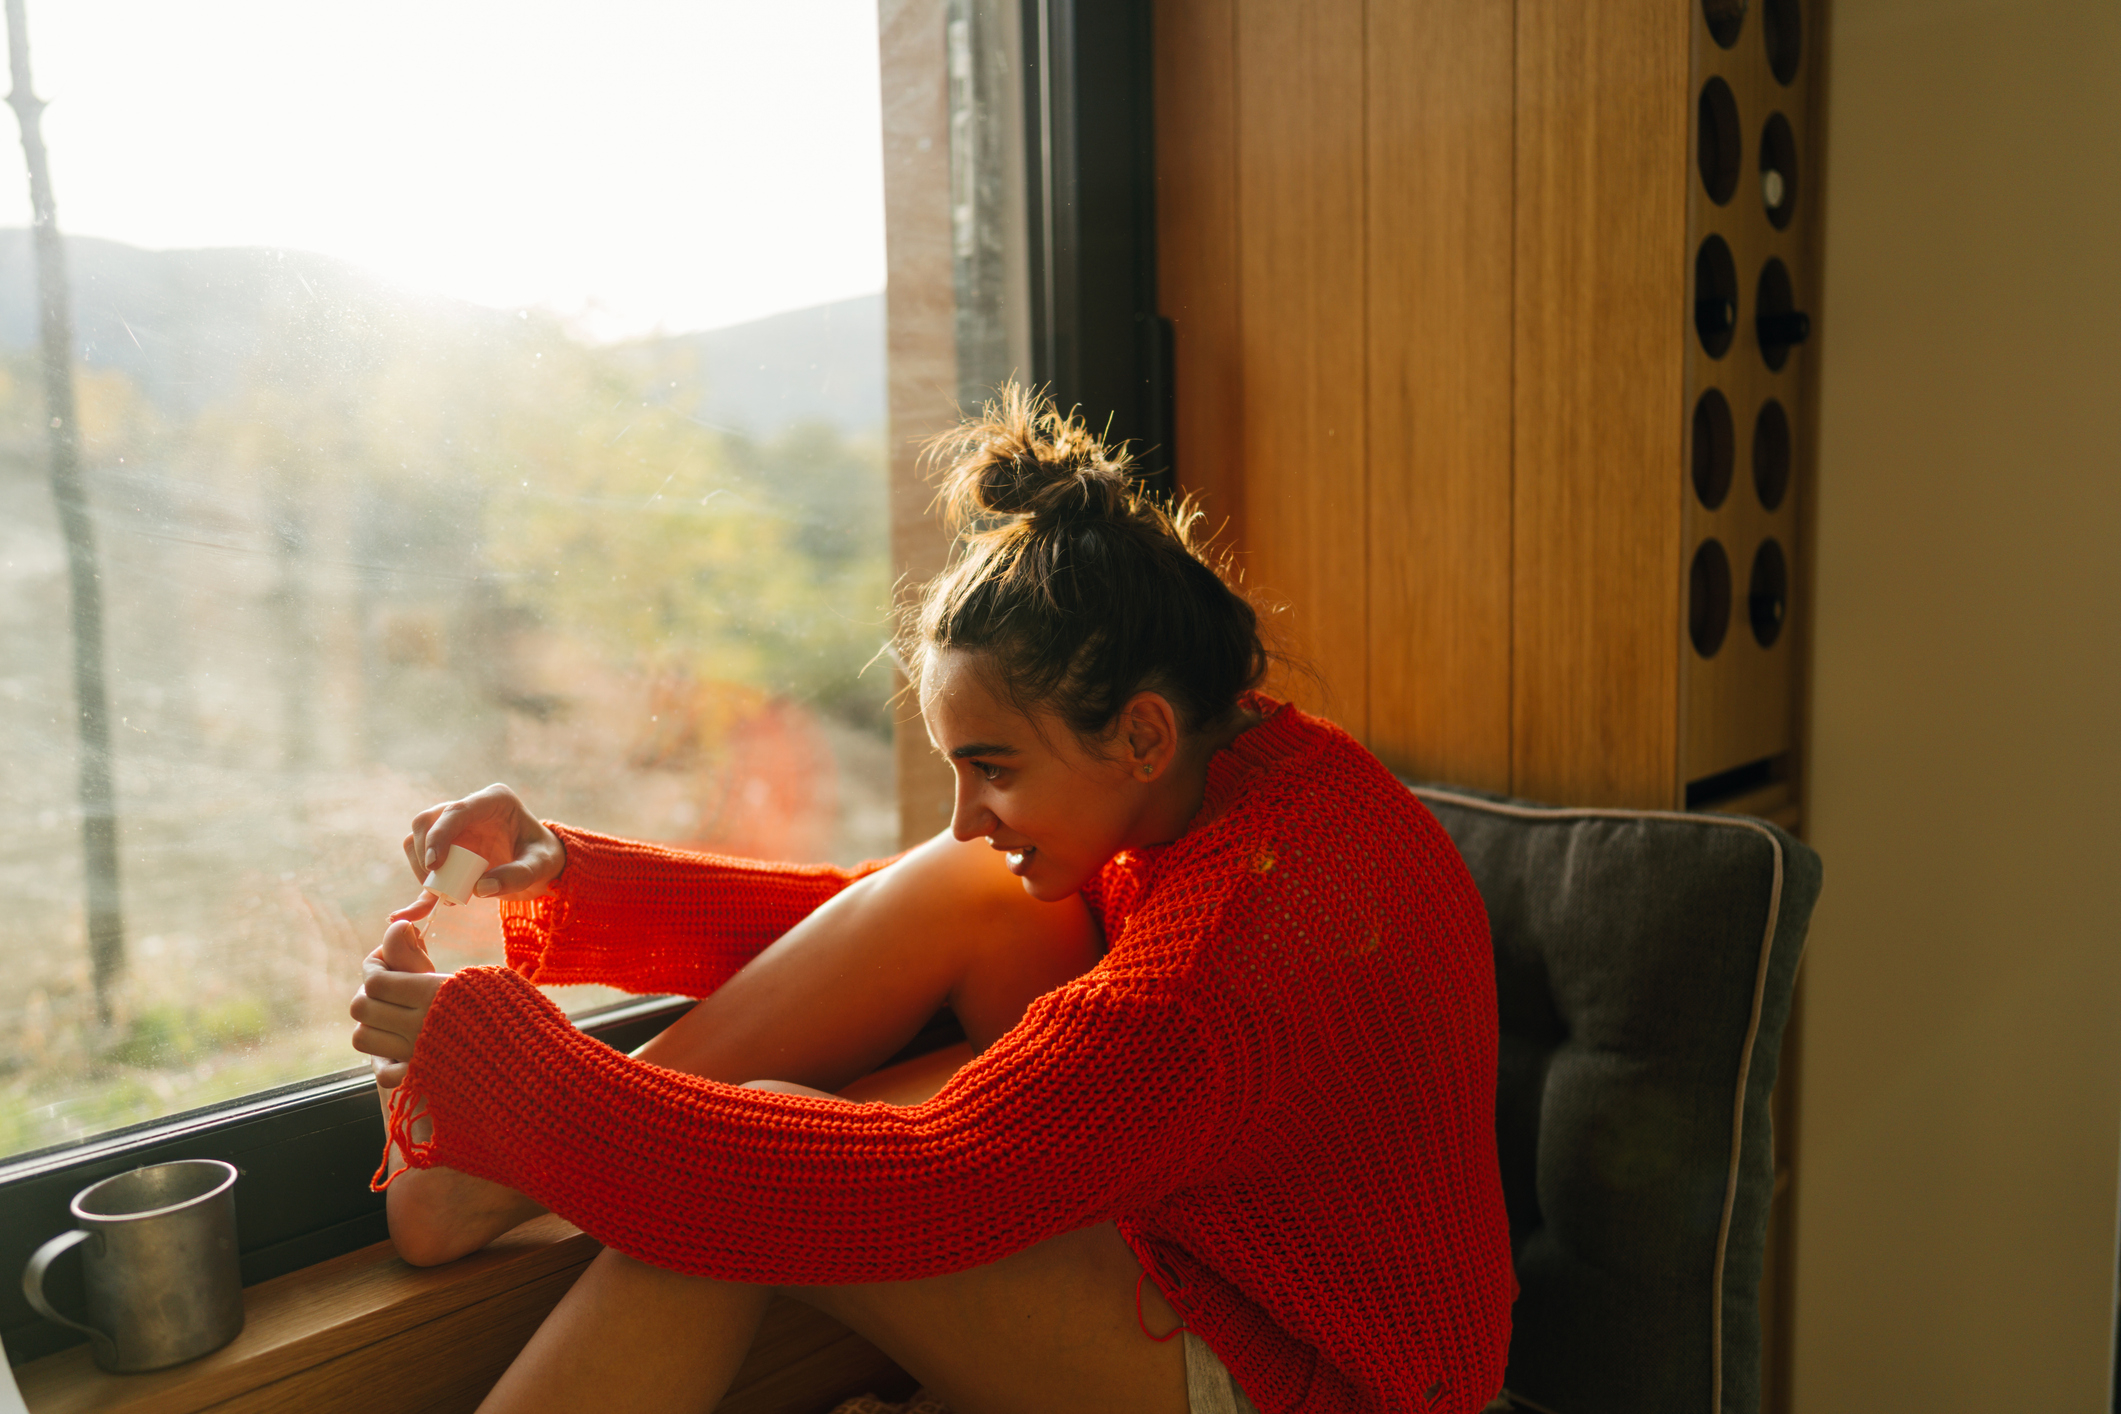 Woman seated by window, smiling, in cozy red knitwear, applying toenail polish